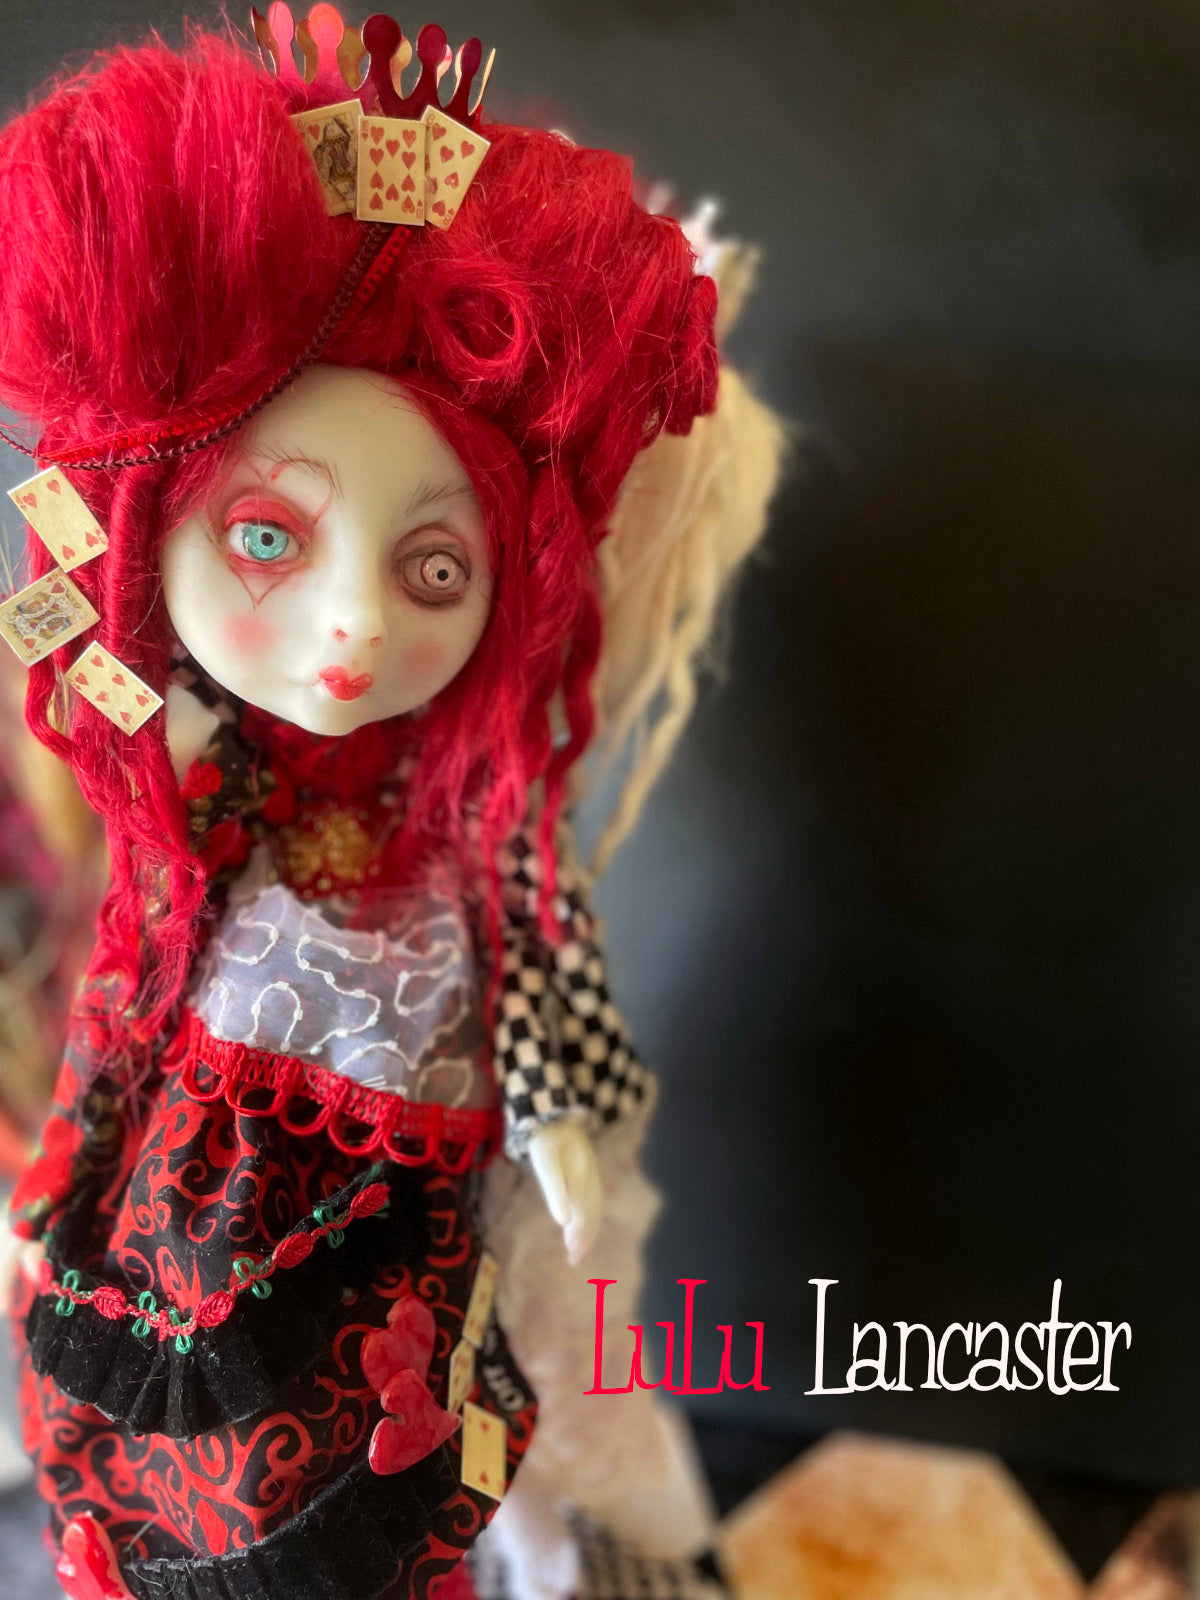 Conjoined Red and White Queens of Wonderland Original LuLu Lancaster Art Doll